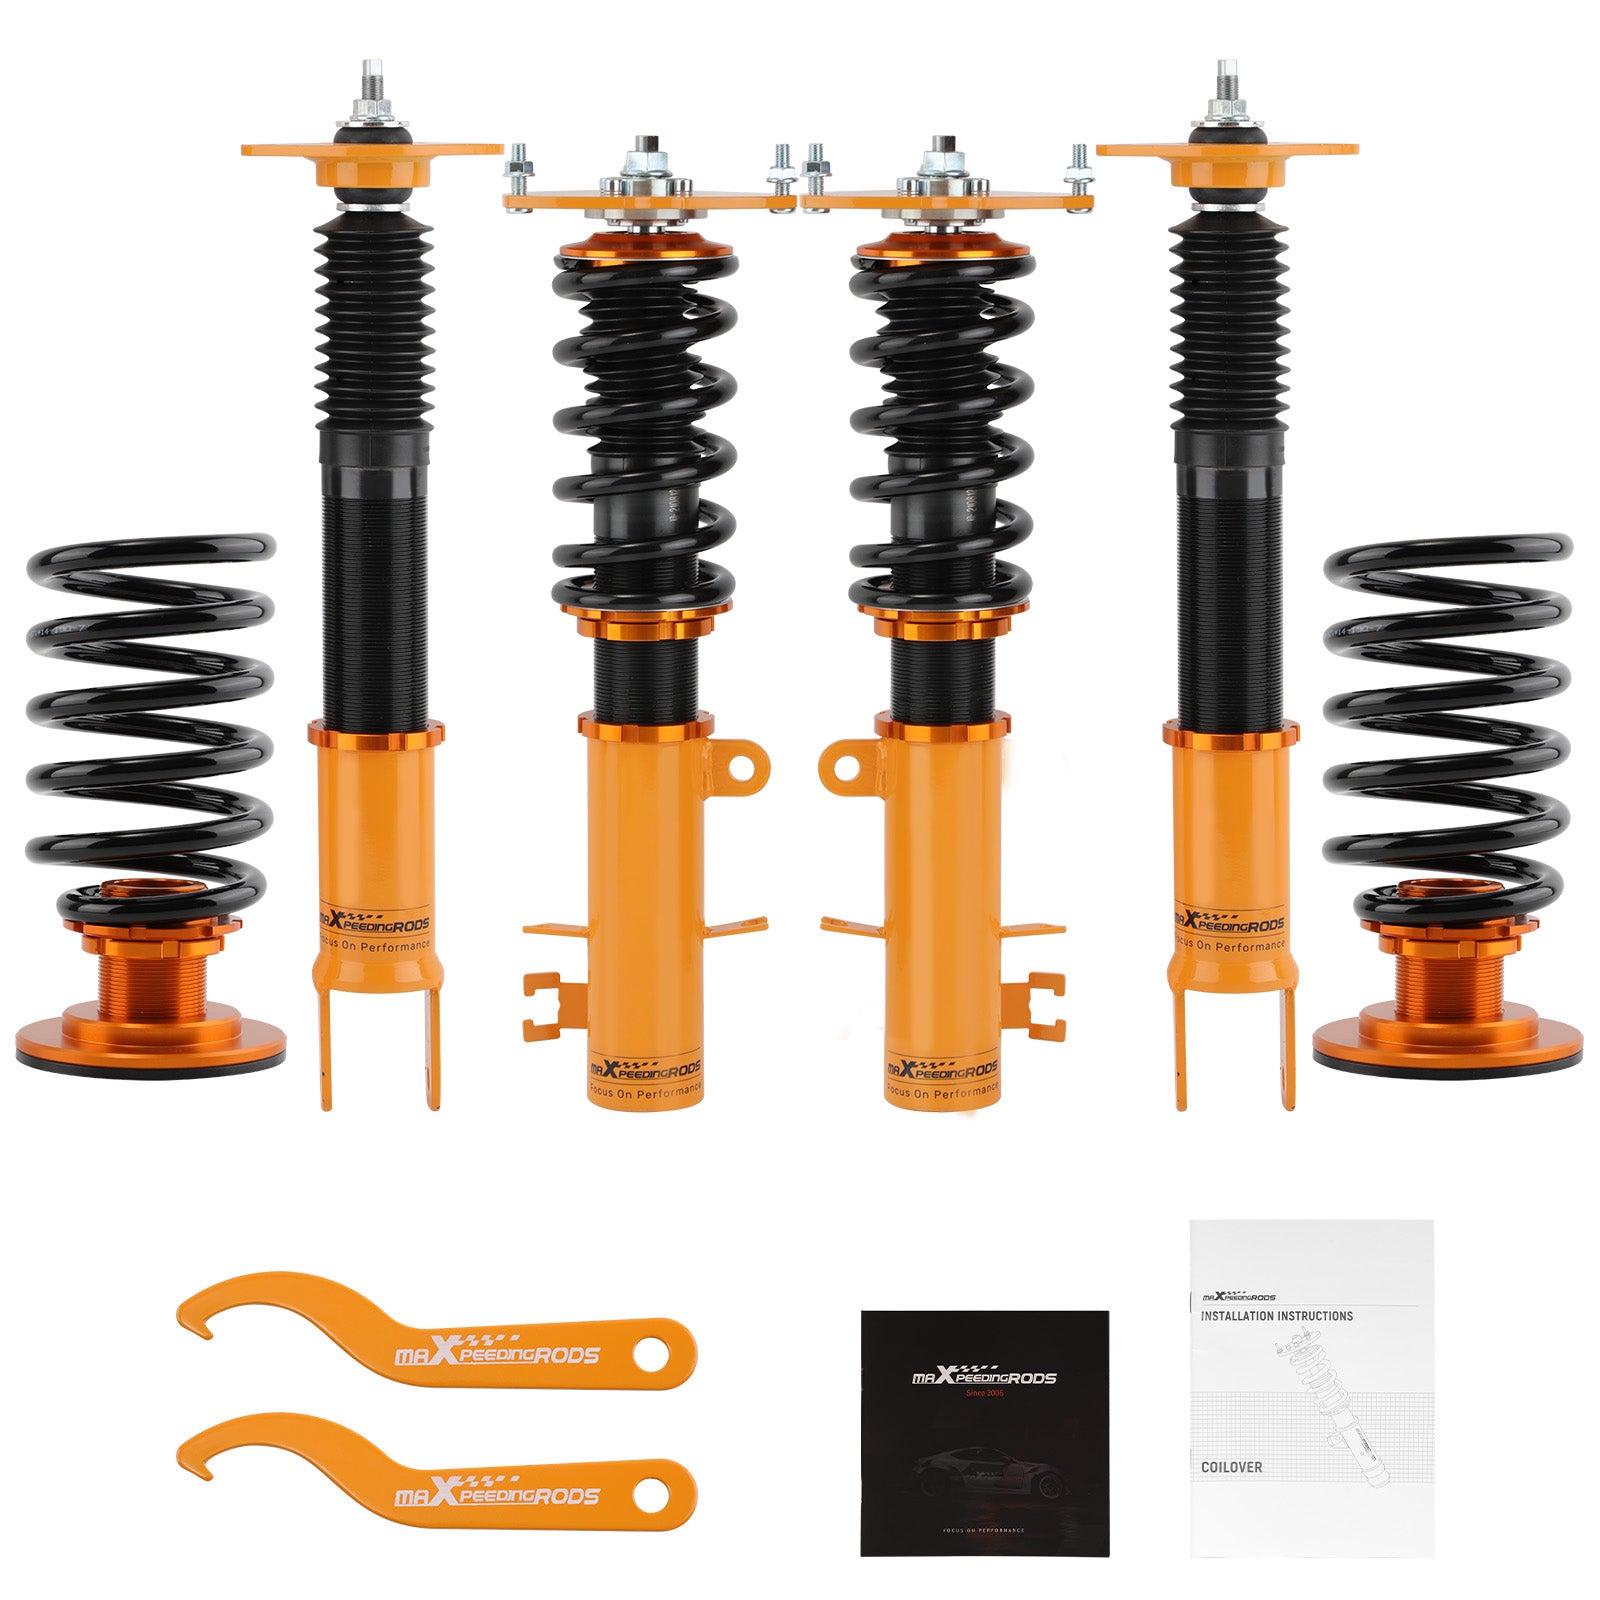 ZNTS Coilover Spring & Shock Assembly For Nissan Altima Maxima Sedan Coupe Coilovers 2007 - 2013 23616123